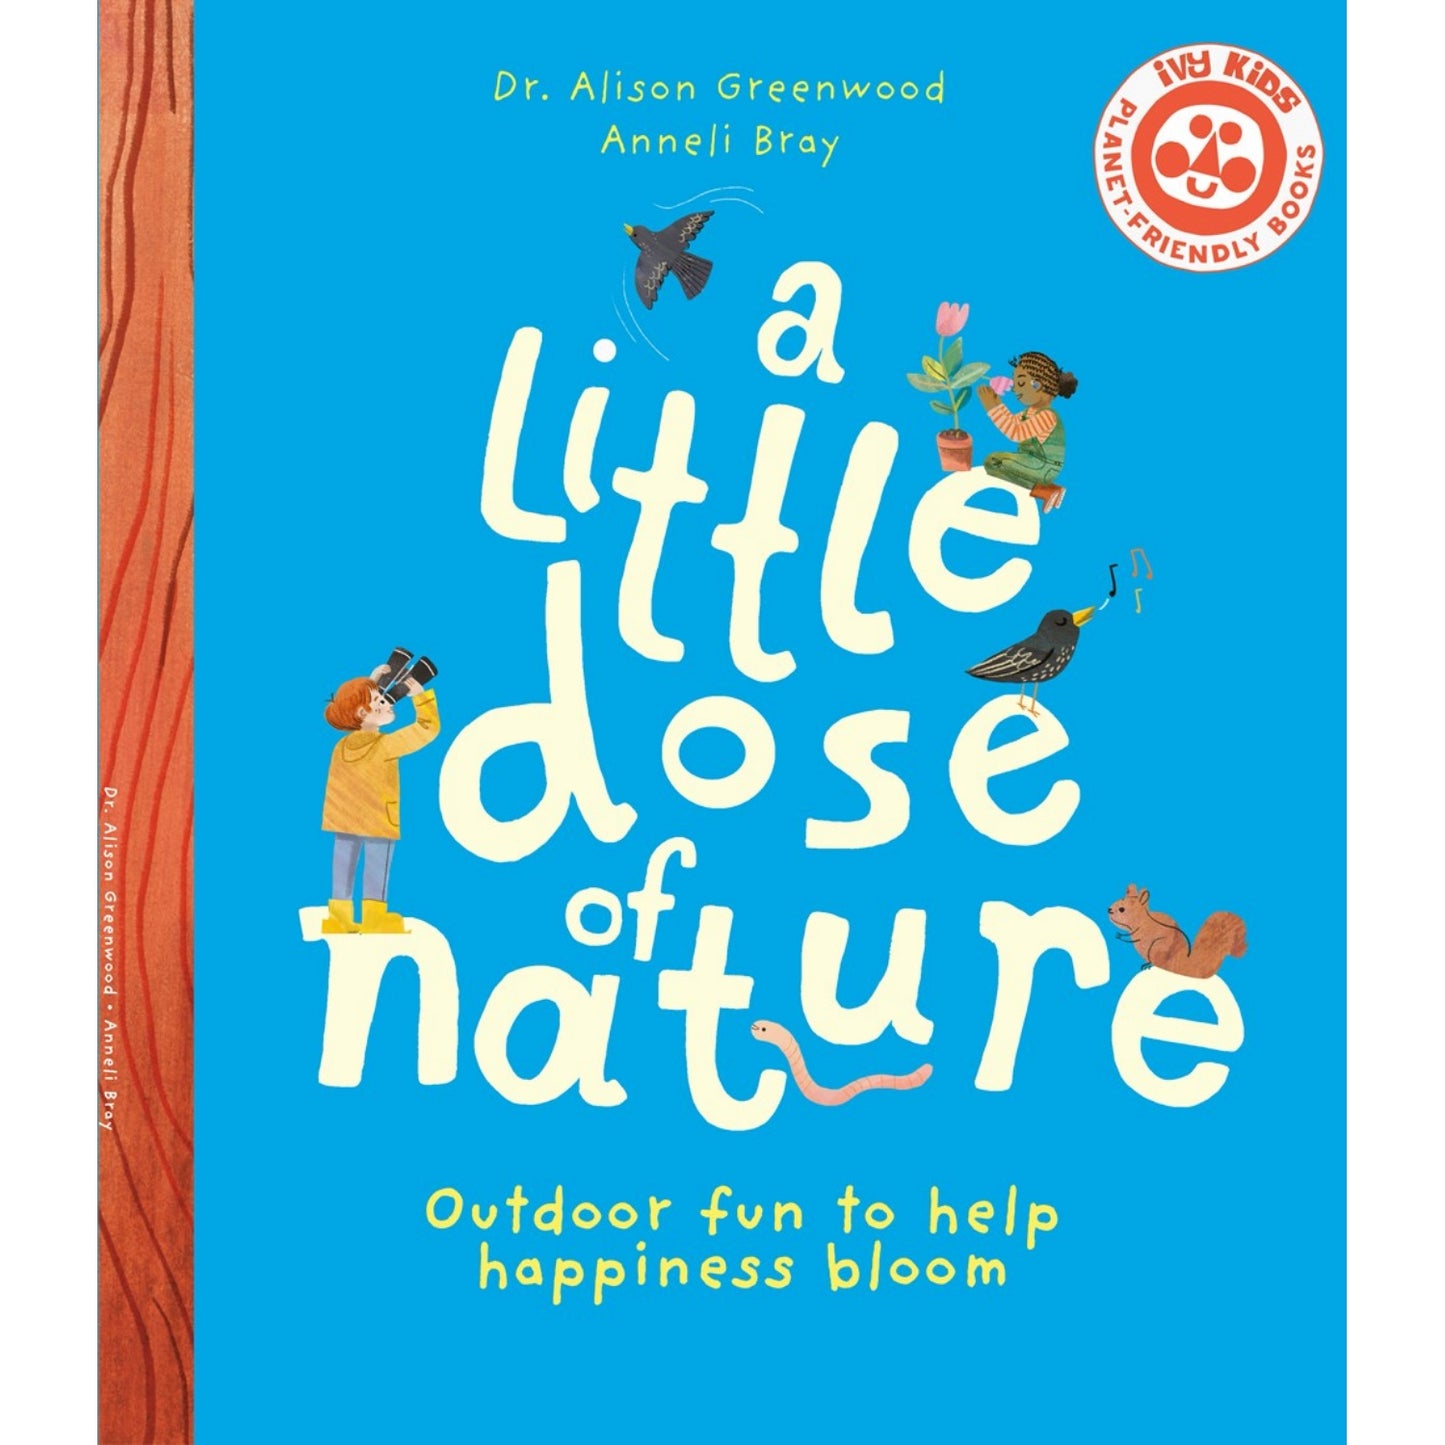 A Little Dose of Nature | Children’s Book on Nature